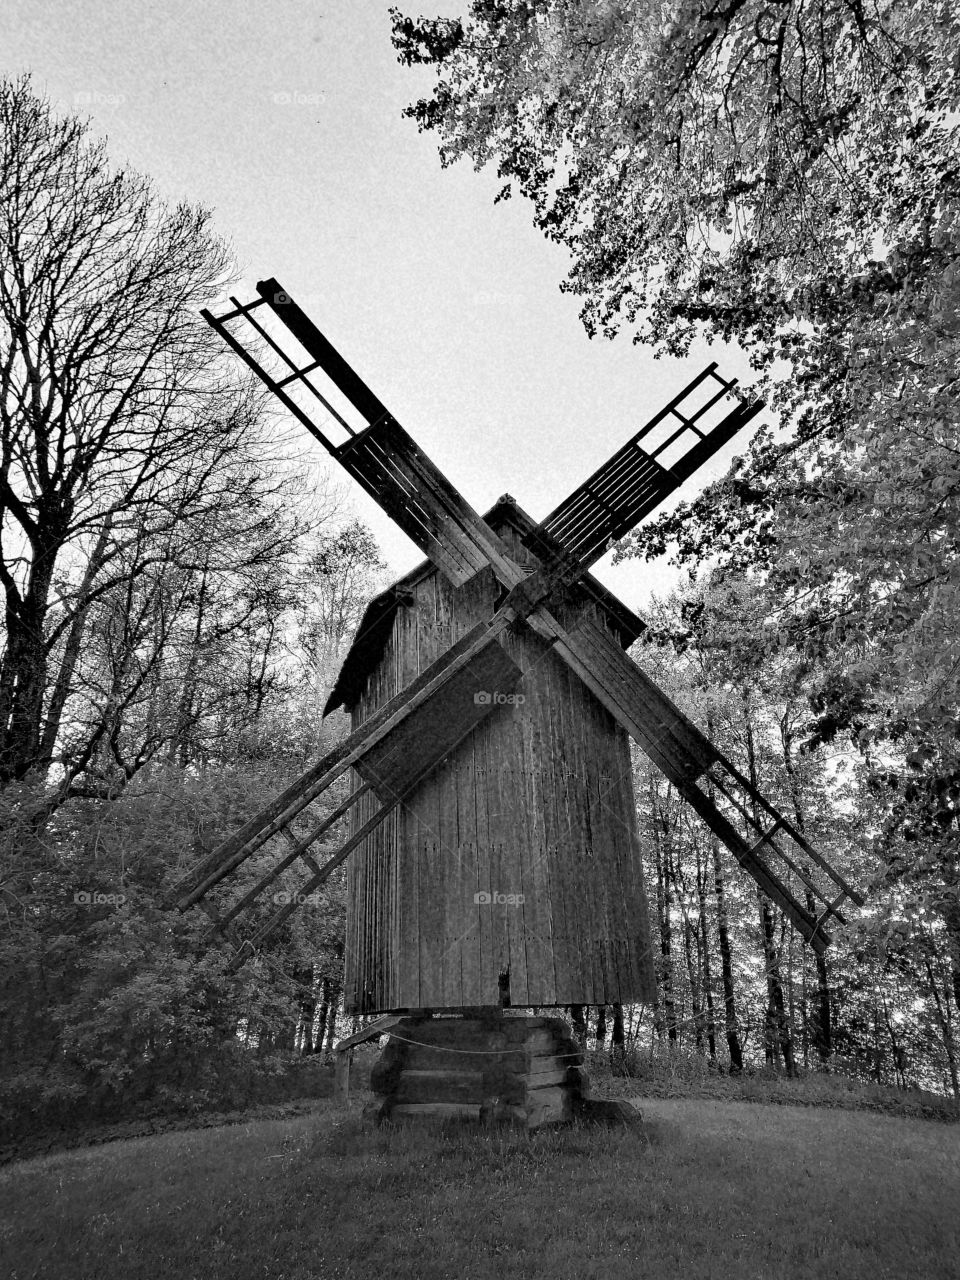 The old mill.